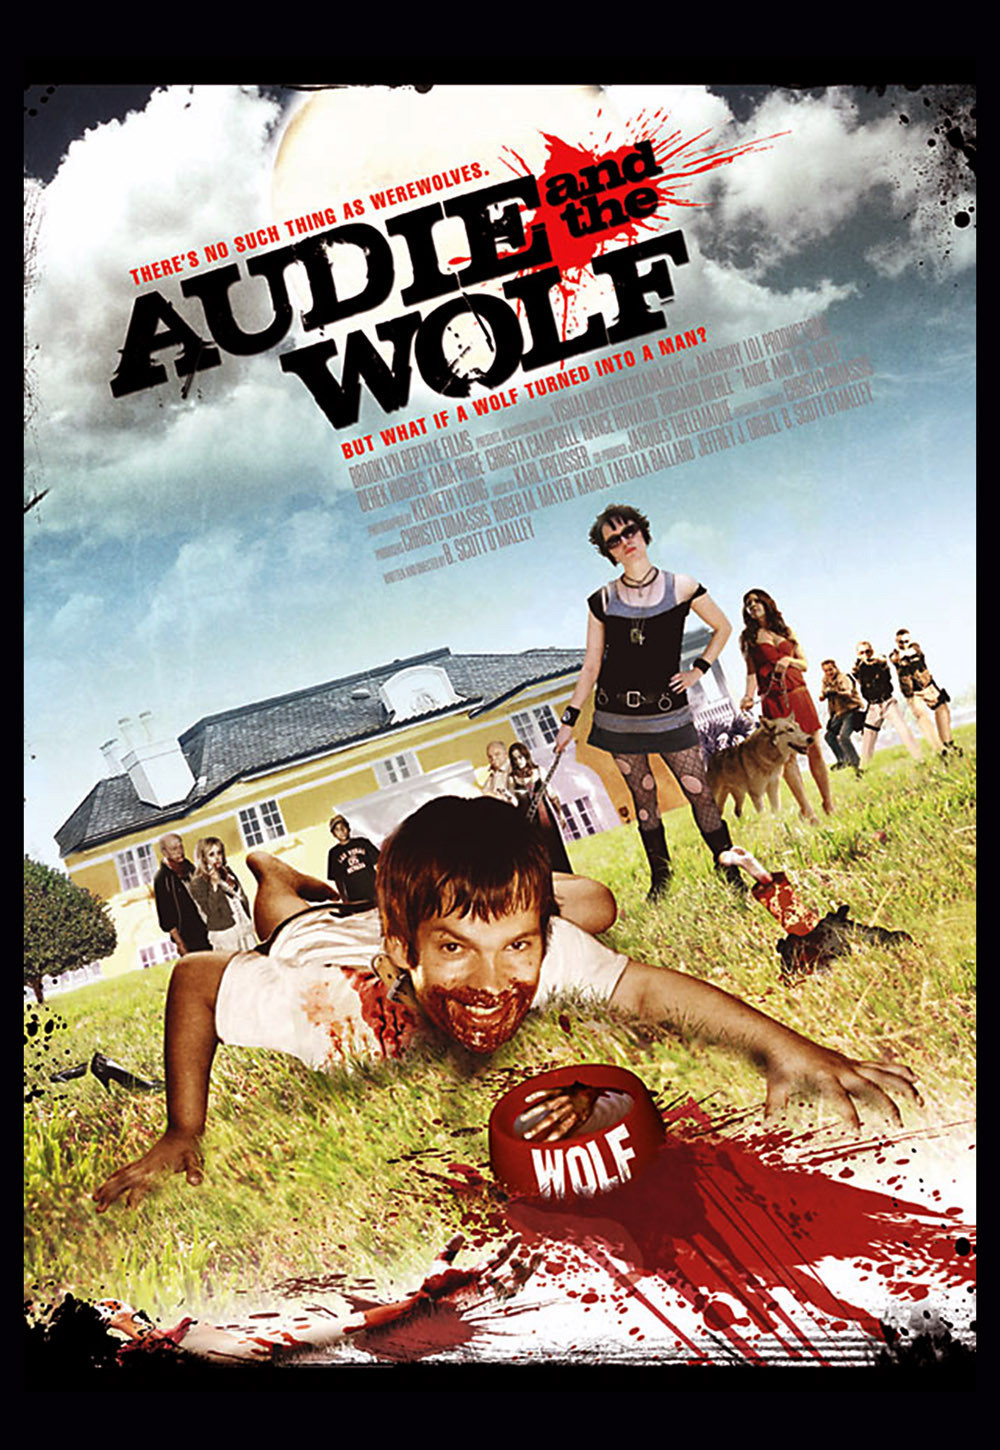 Audie & The Wolf